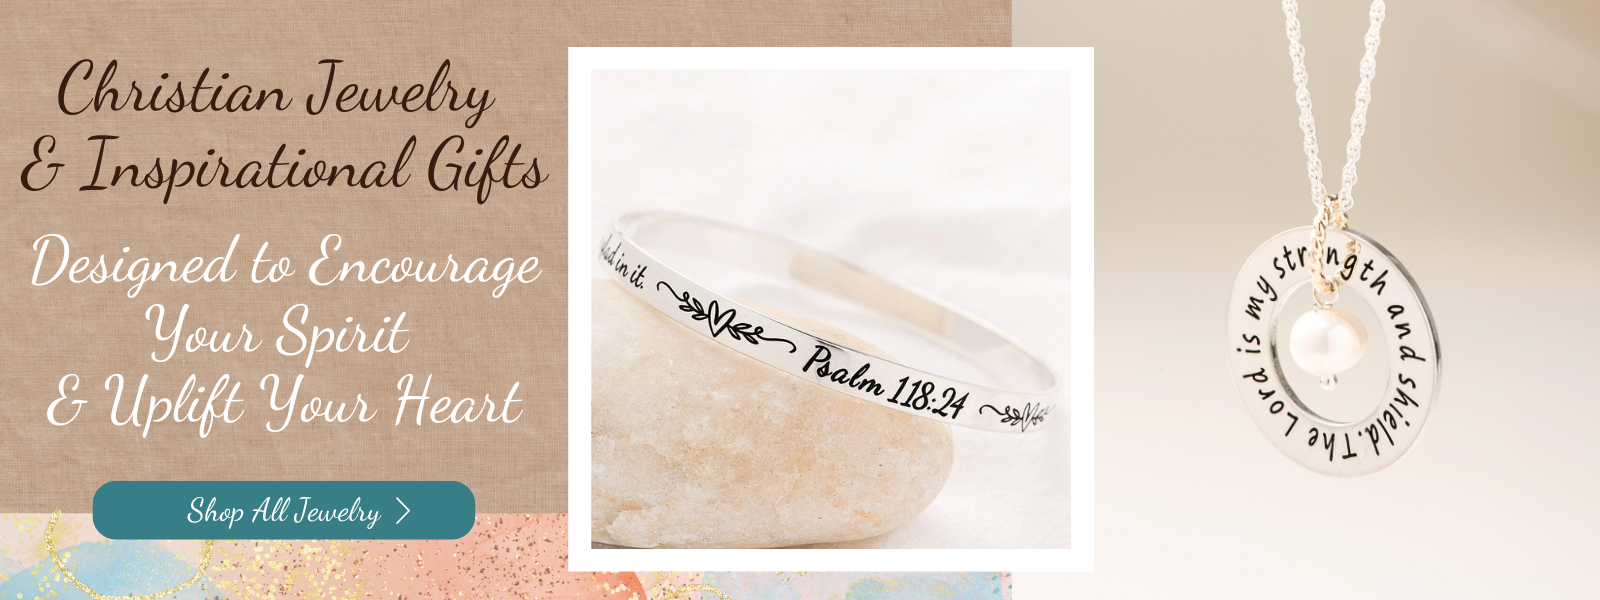 Christian Jewelry & Inspirational Gifts Designed to Encourage Your Spirit & Uplift Your Heart